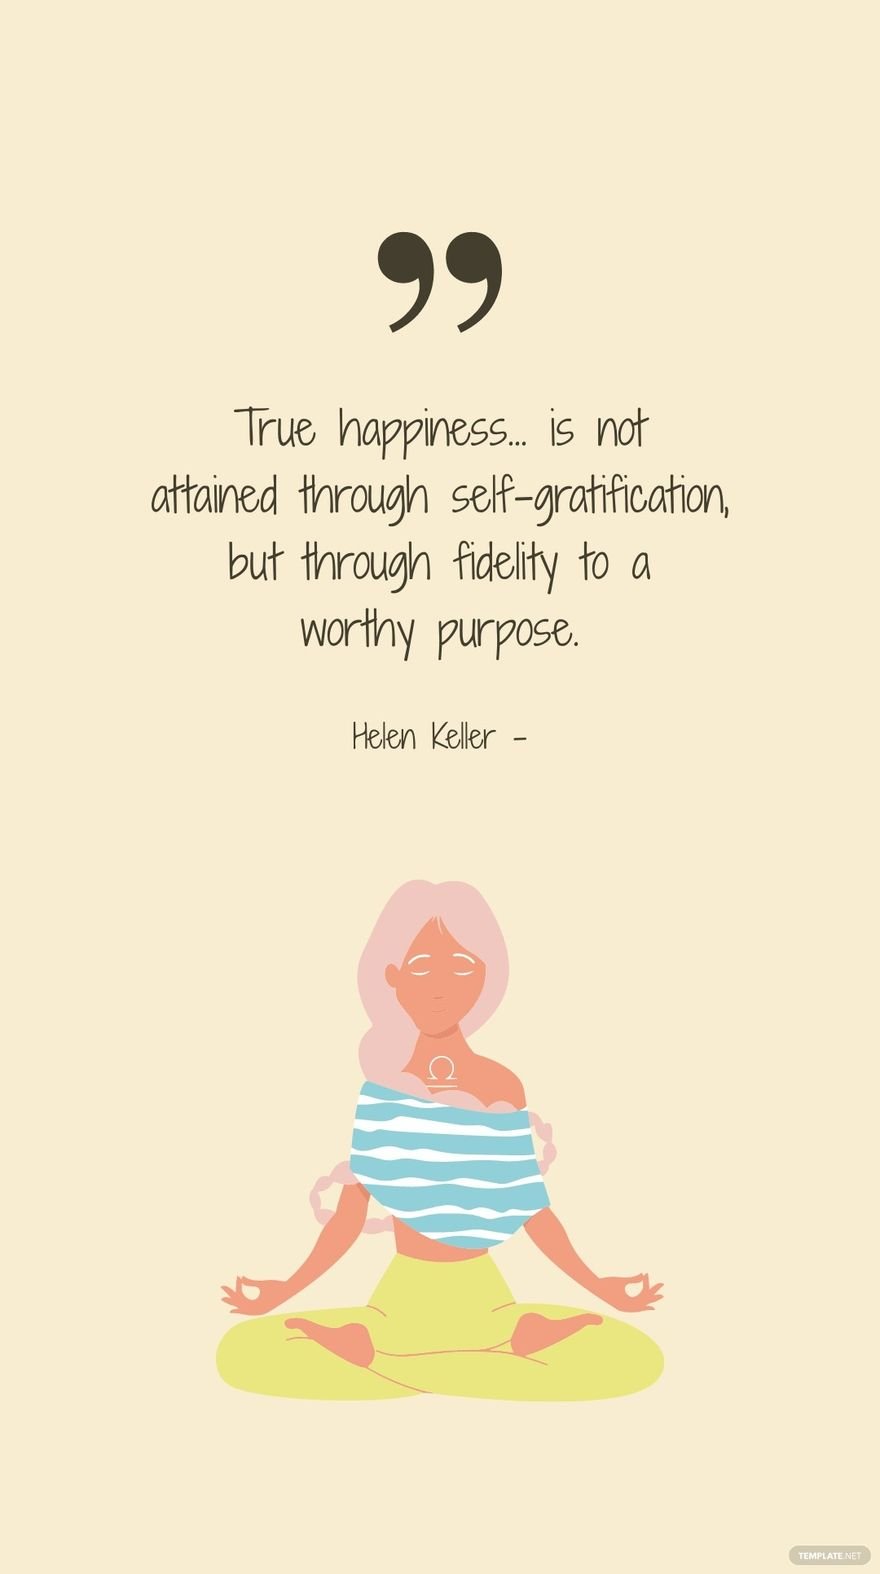 Helen Keller - True happiness... is not attained through self-gratification, but through fidelity to a worthy purpose.